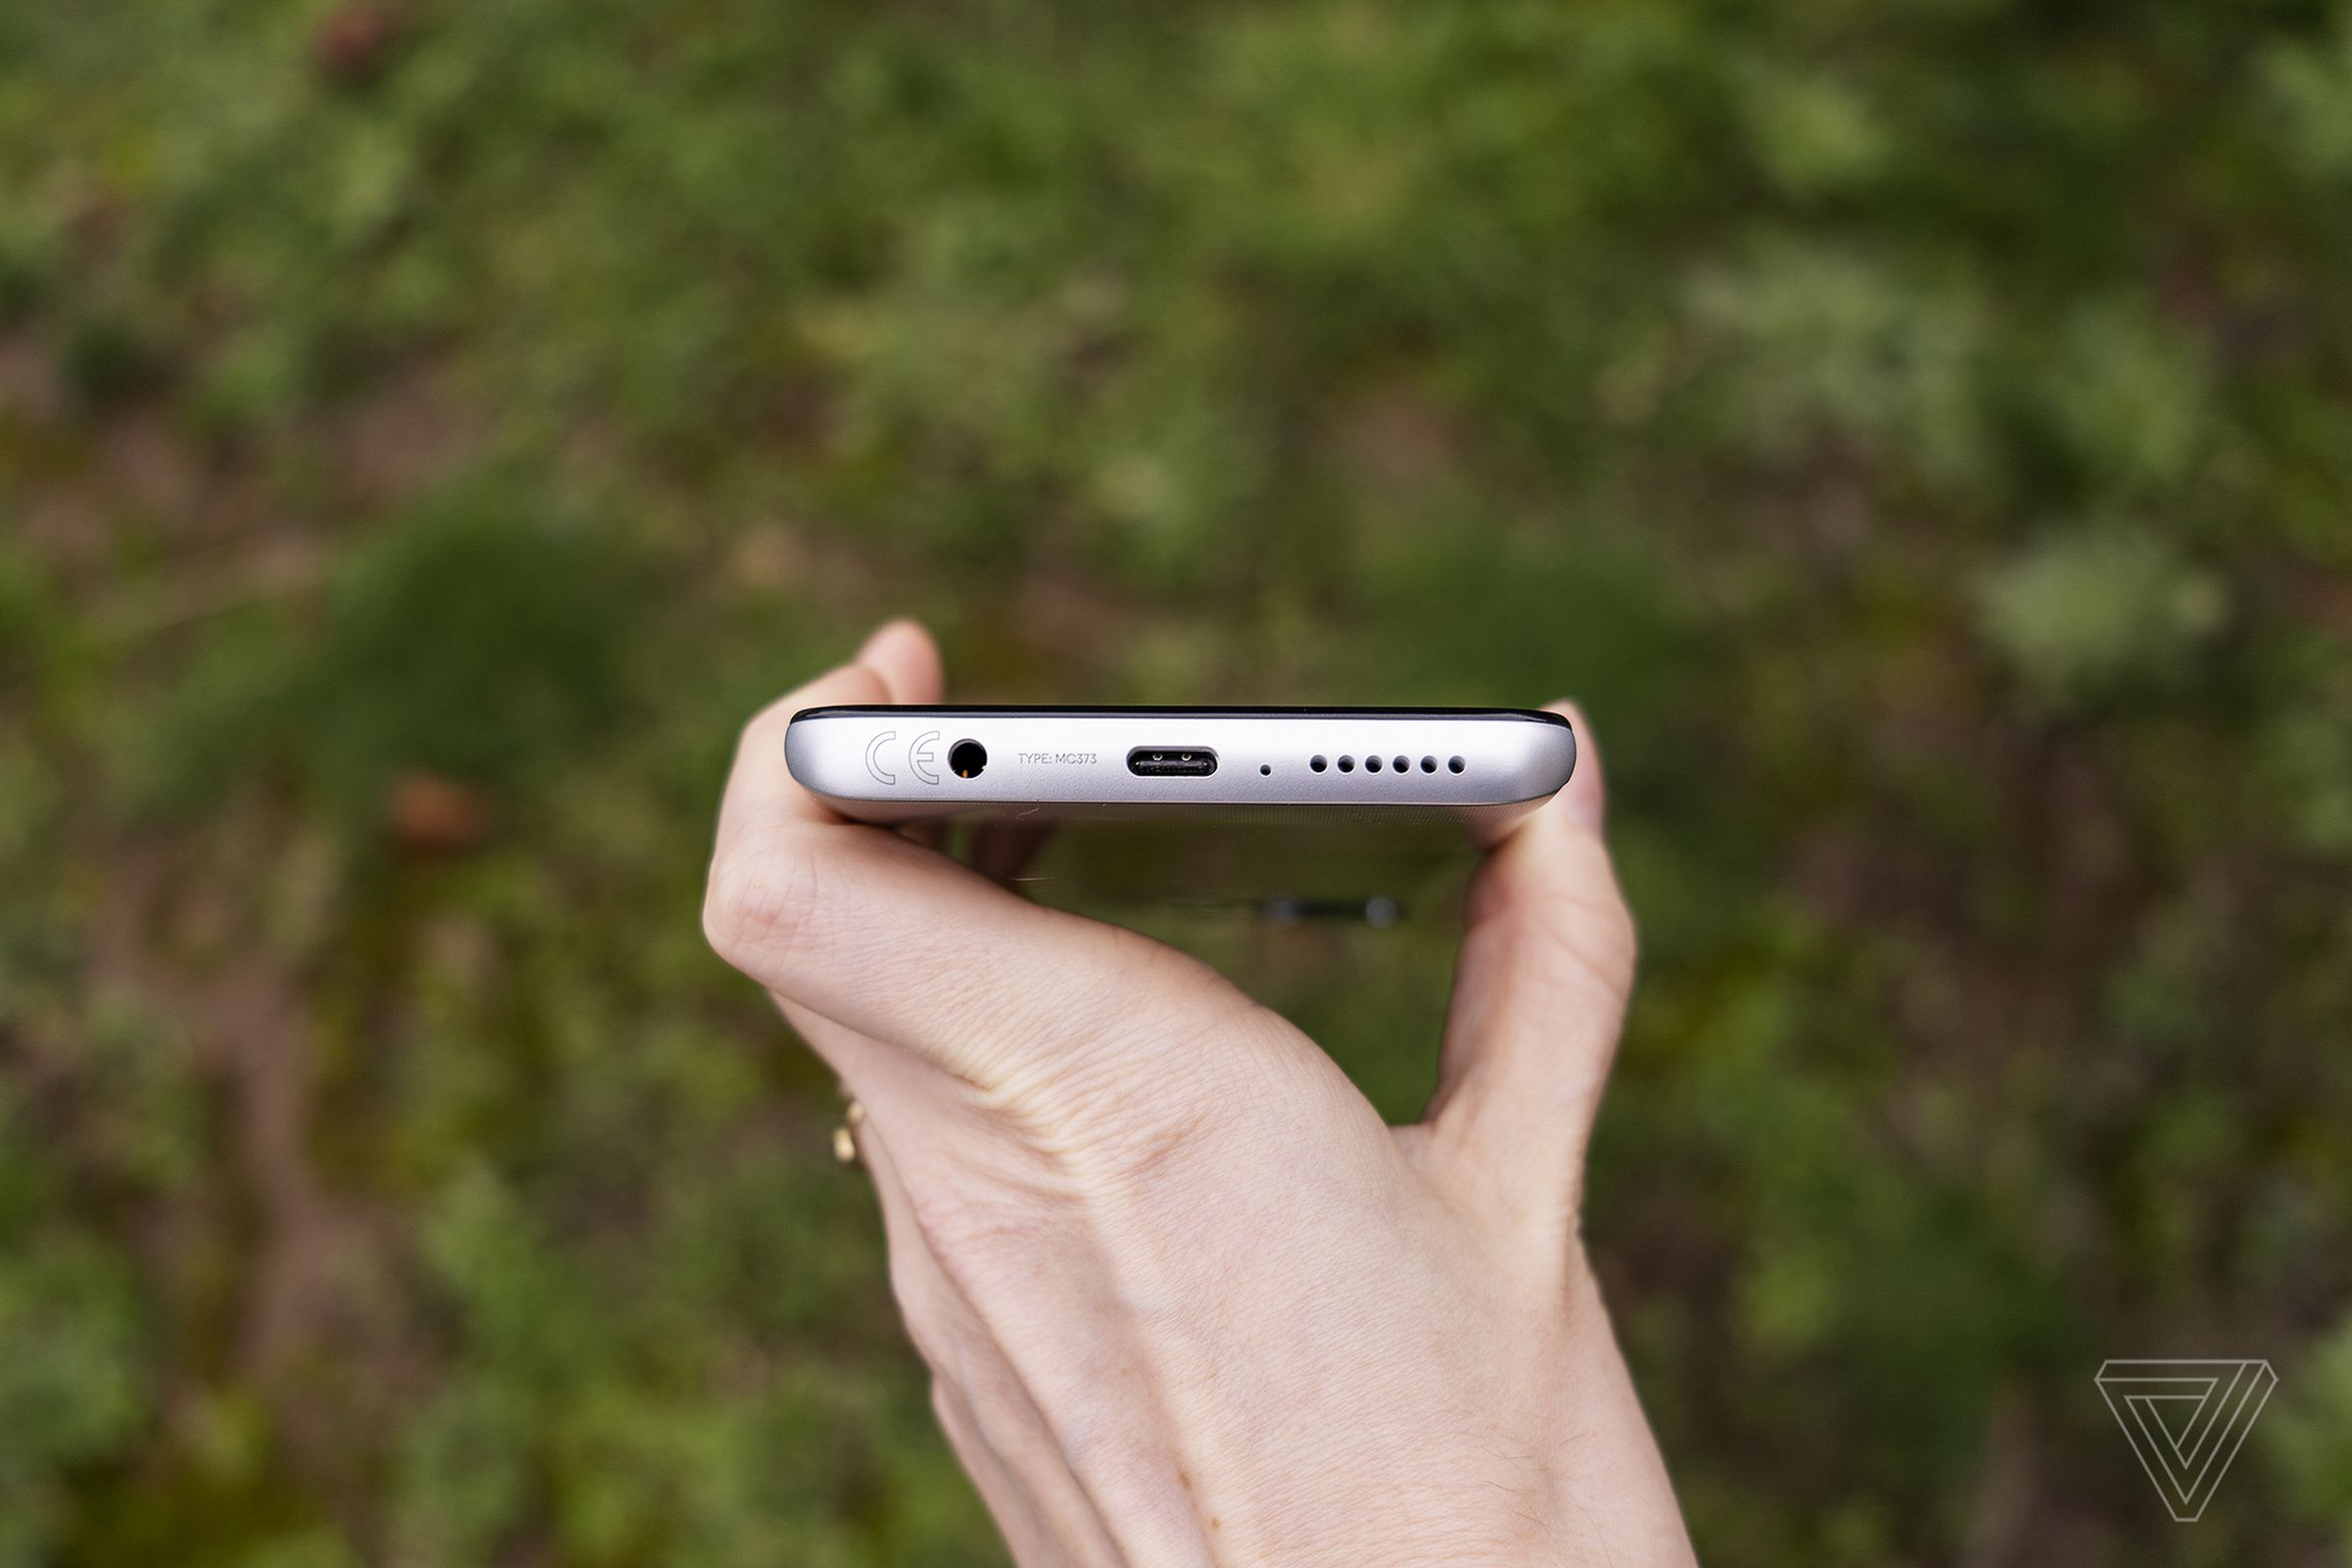 You’ll still find a 3.5mm headphone jack on the Ace.